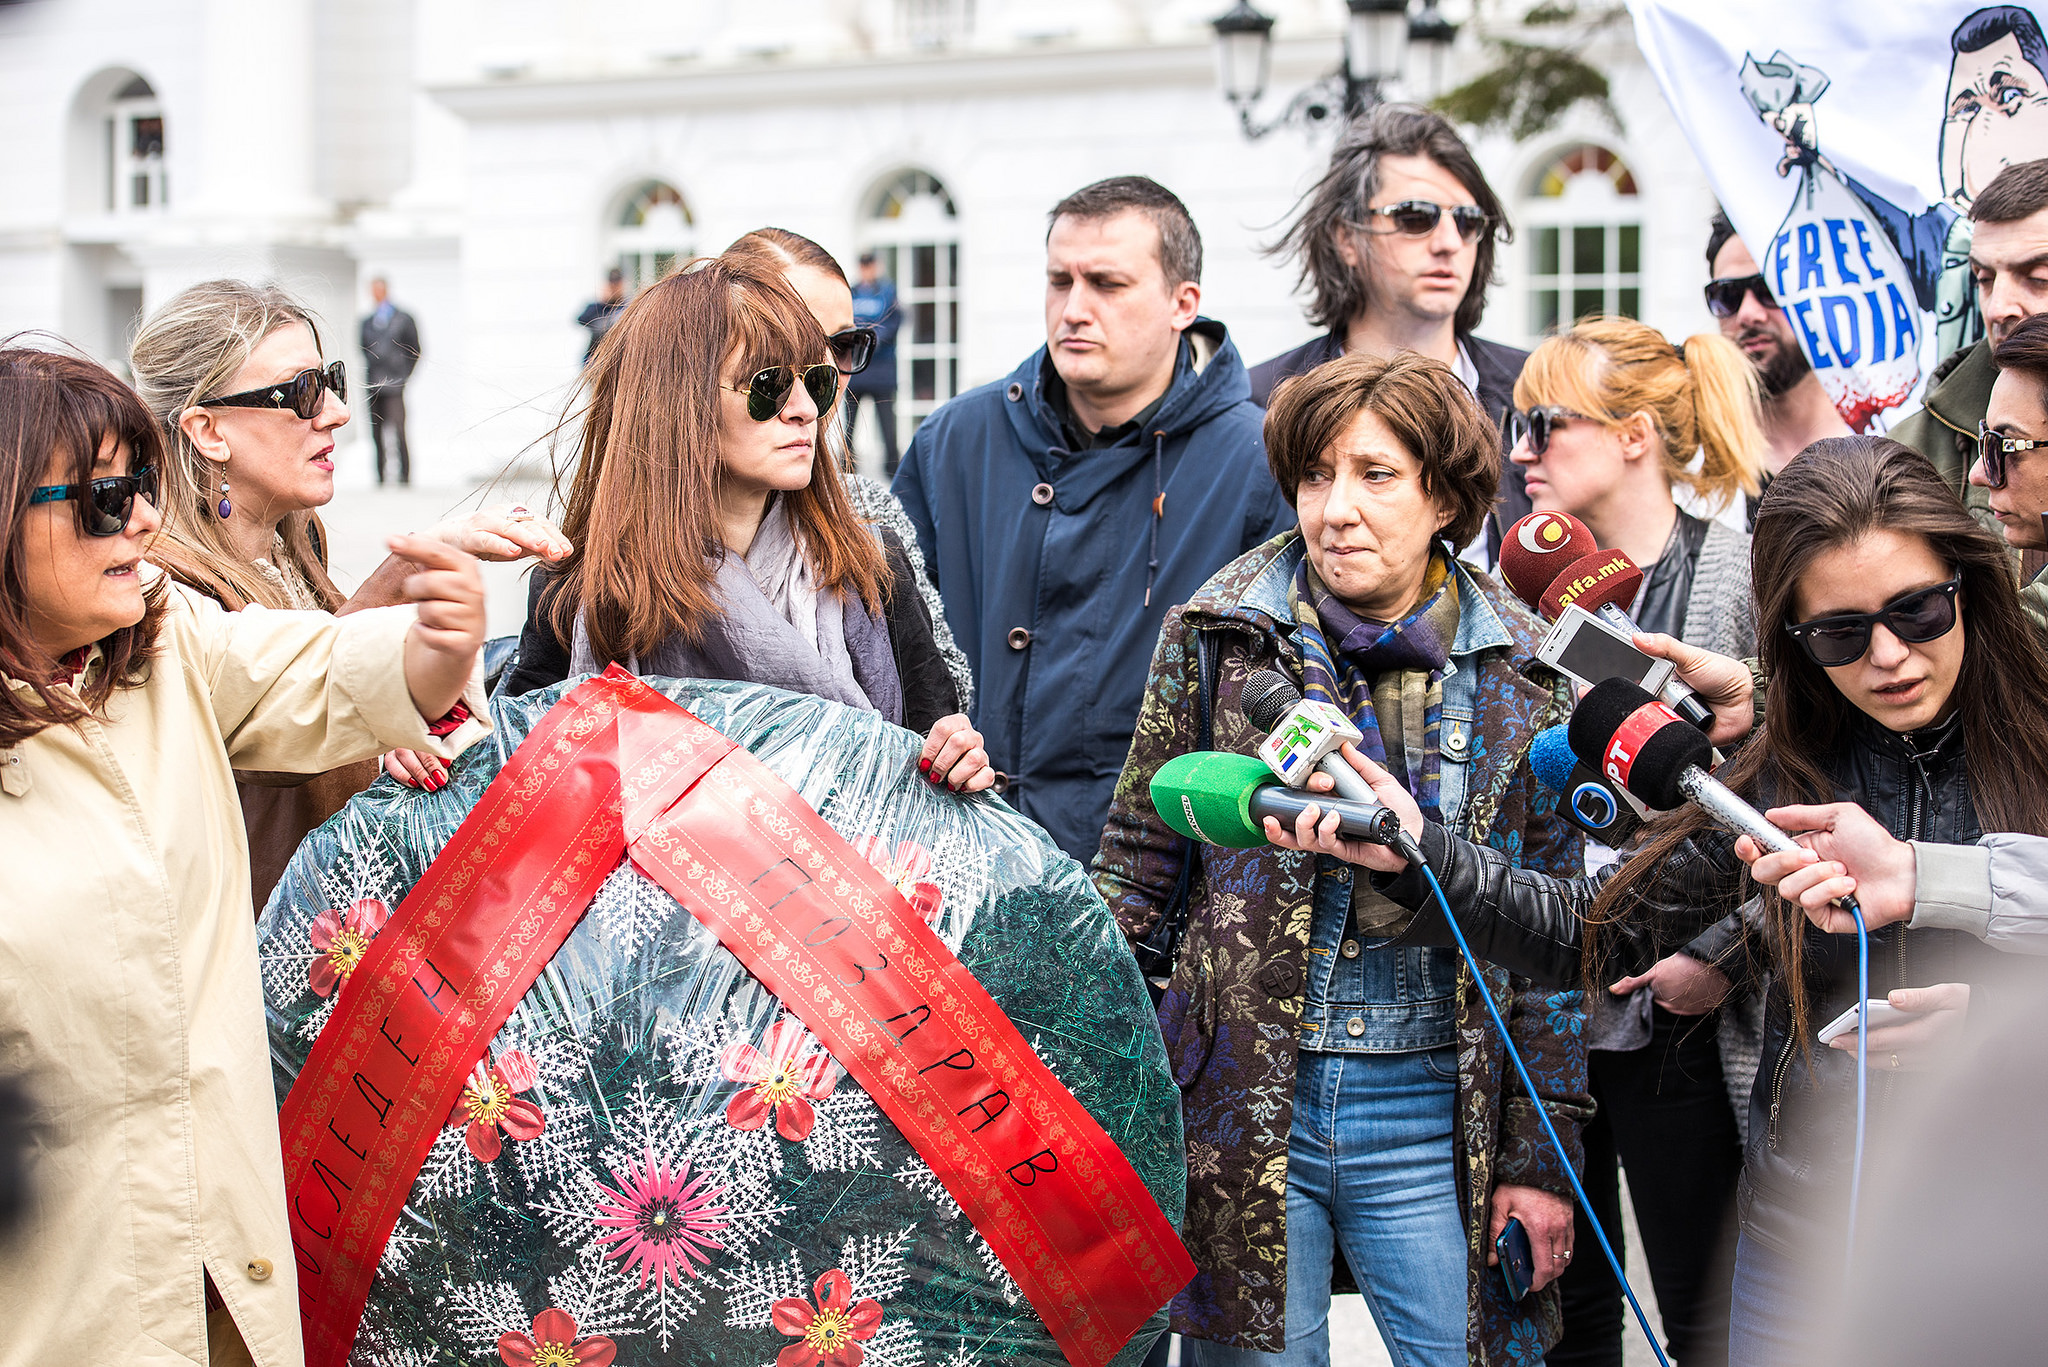 Several journalists spoke at a protest in Skopje about the recent threats directed at journalist Borjan Jovanovski, holding the funeral wreath that had been delivered to his home as a death threat in April 2015. Photo by Vanco Dzambaski, used with permission. 